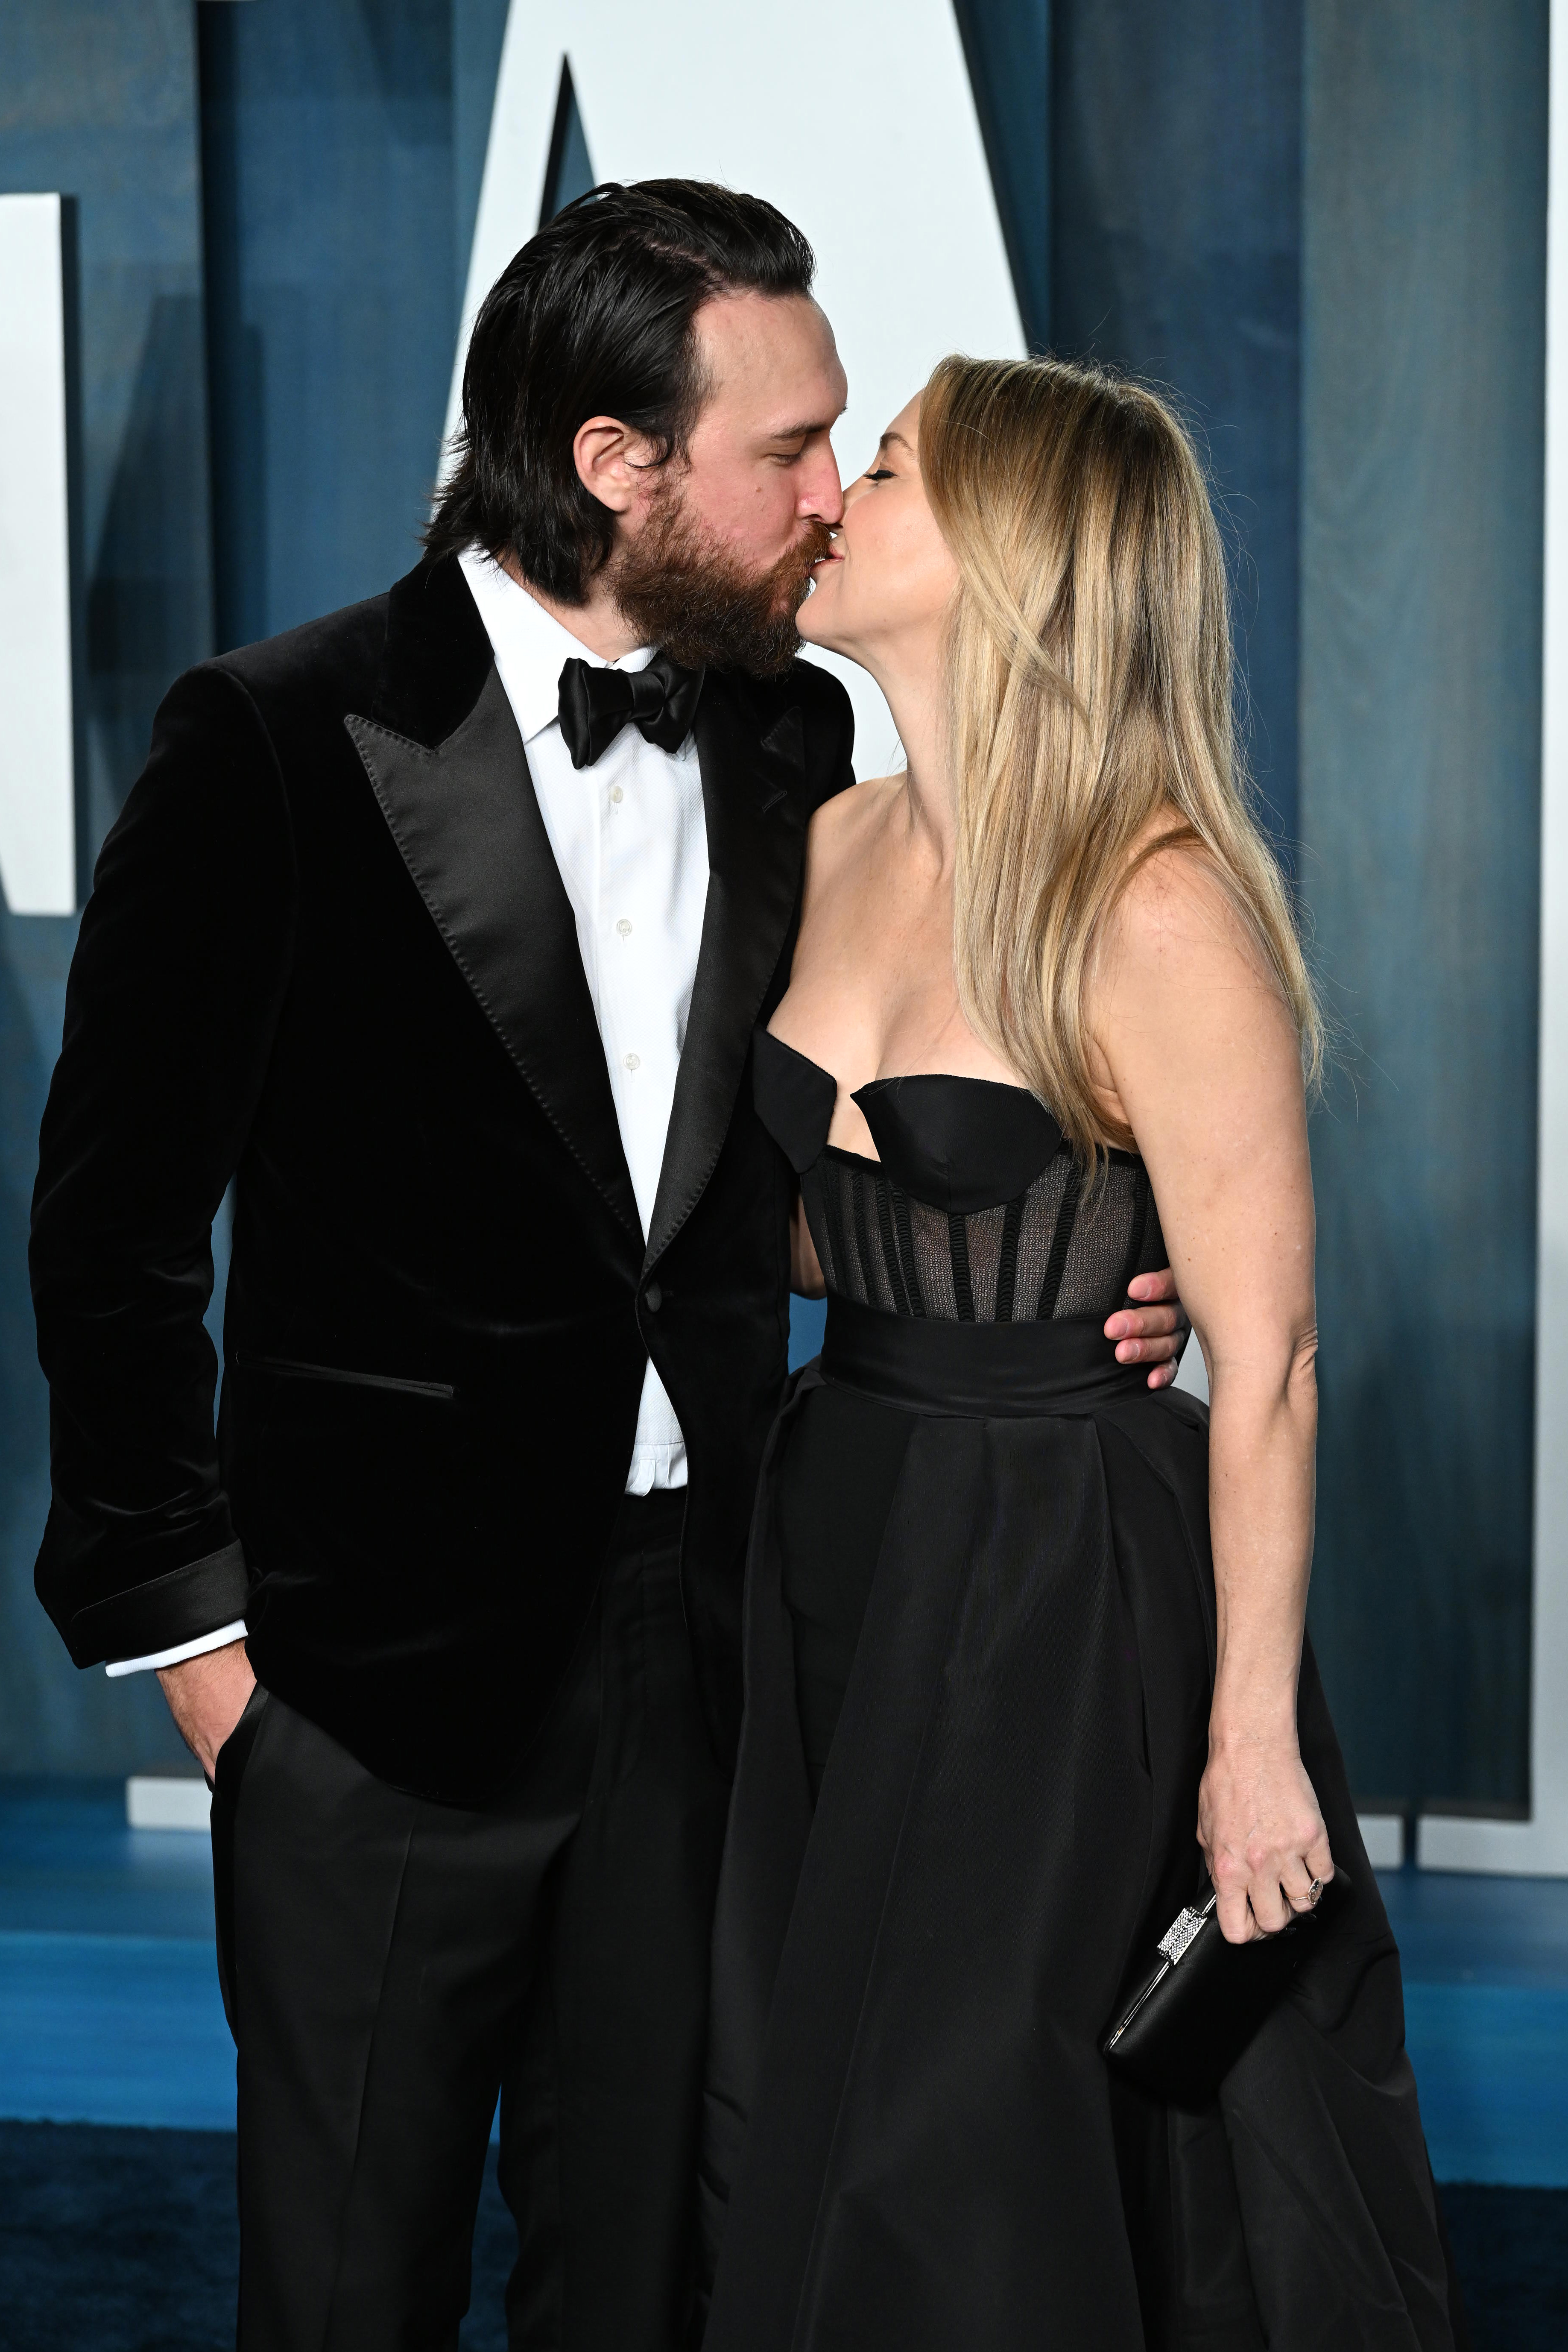 Danny Fujikawa and Kate Hudson during the 2022 Vanity Fair Oscar Party at Wallis Annenberg Center for the Performing Arts on March 27, 2022, in Beverly Hills, California. | Source: Getty Images